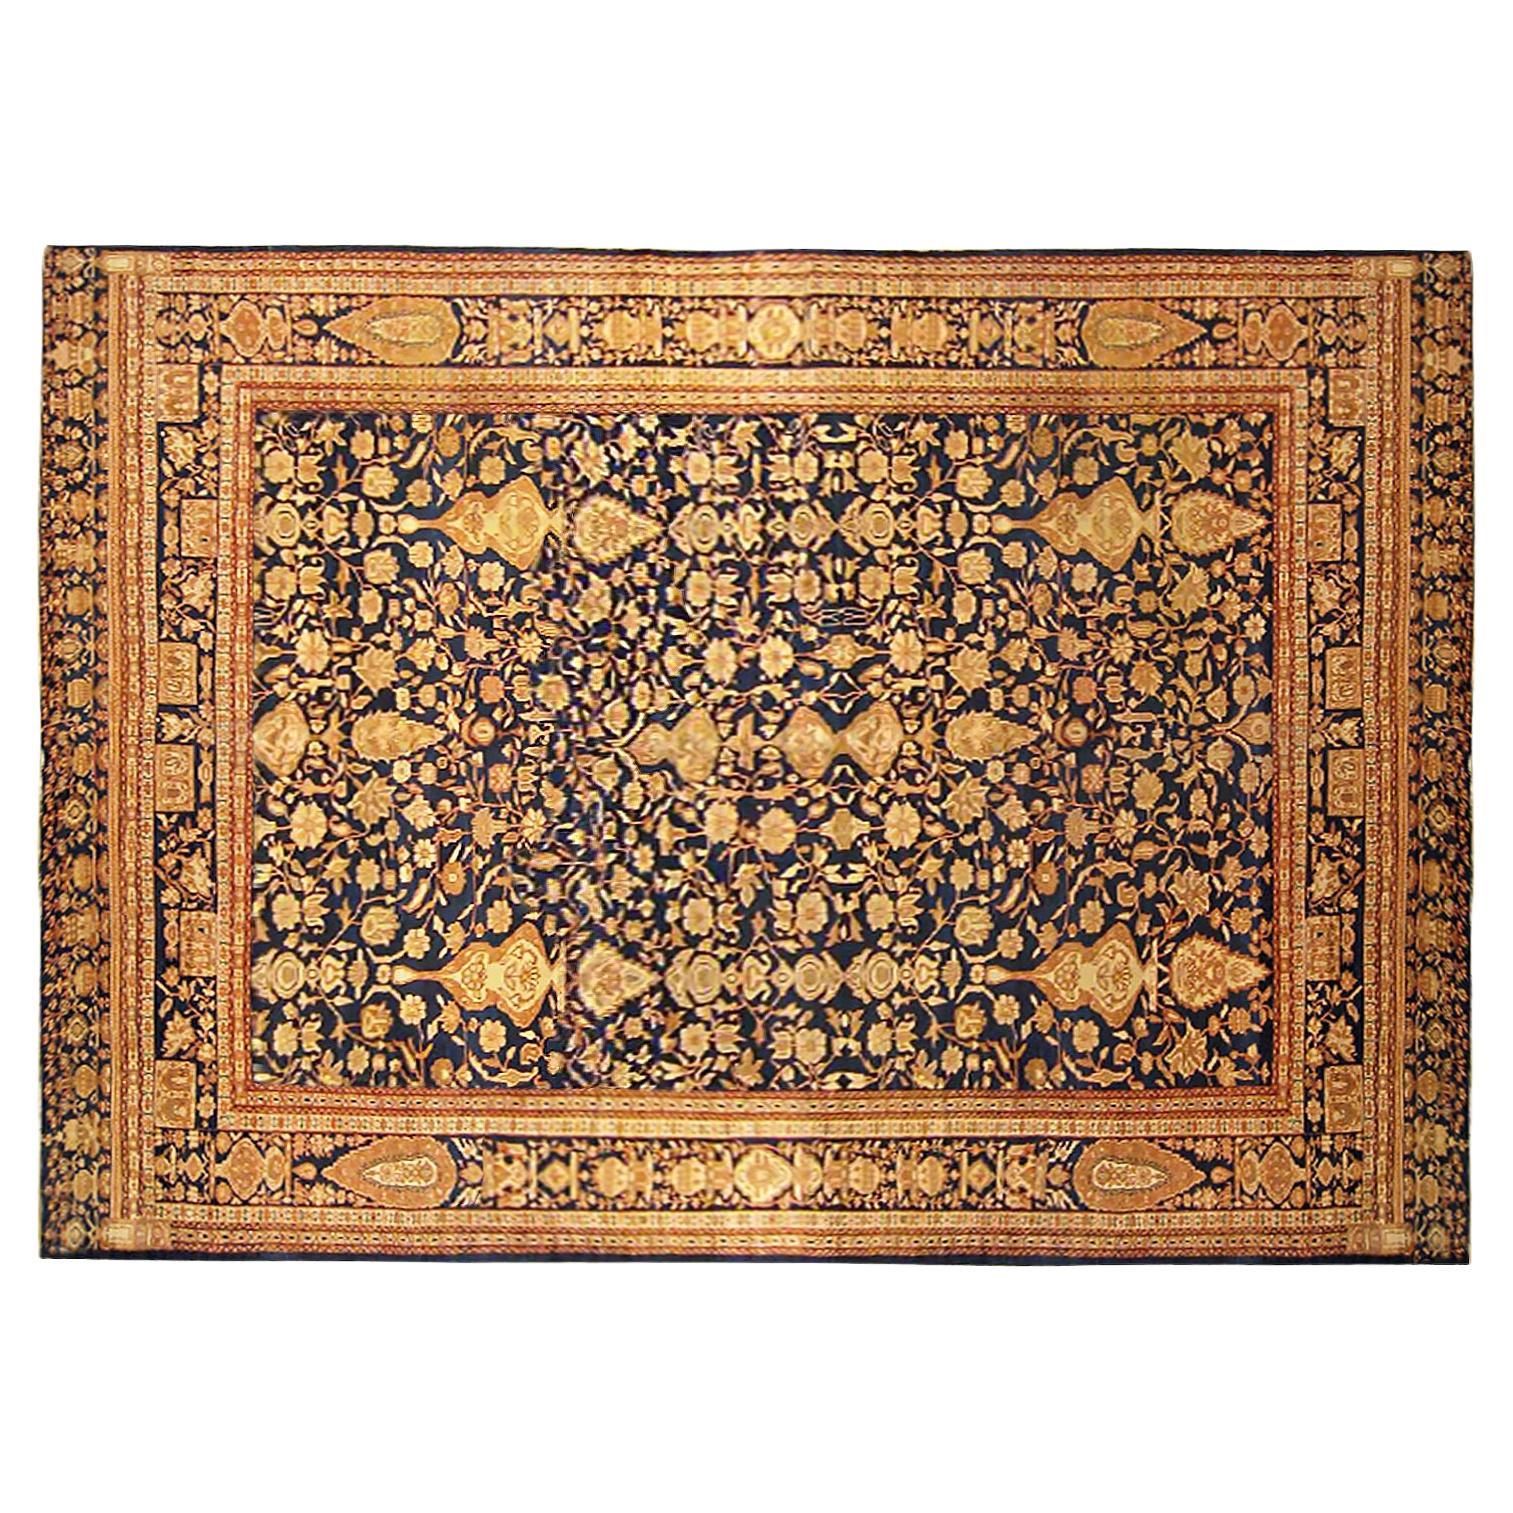 Antique Ferahan Sarouk Oriental Rug, in Room Size, with Intricate Floral Design For Sale